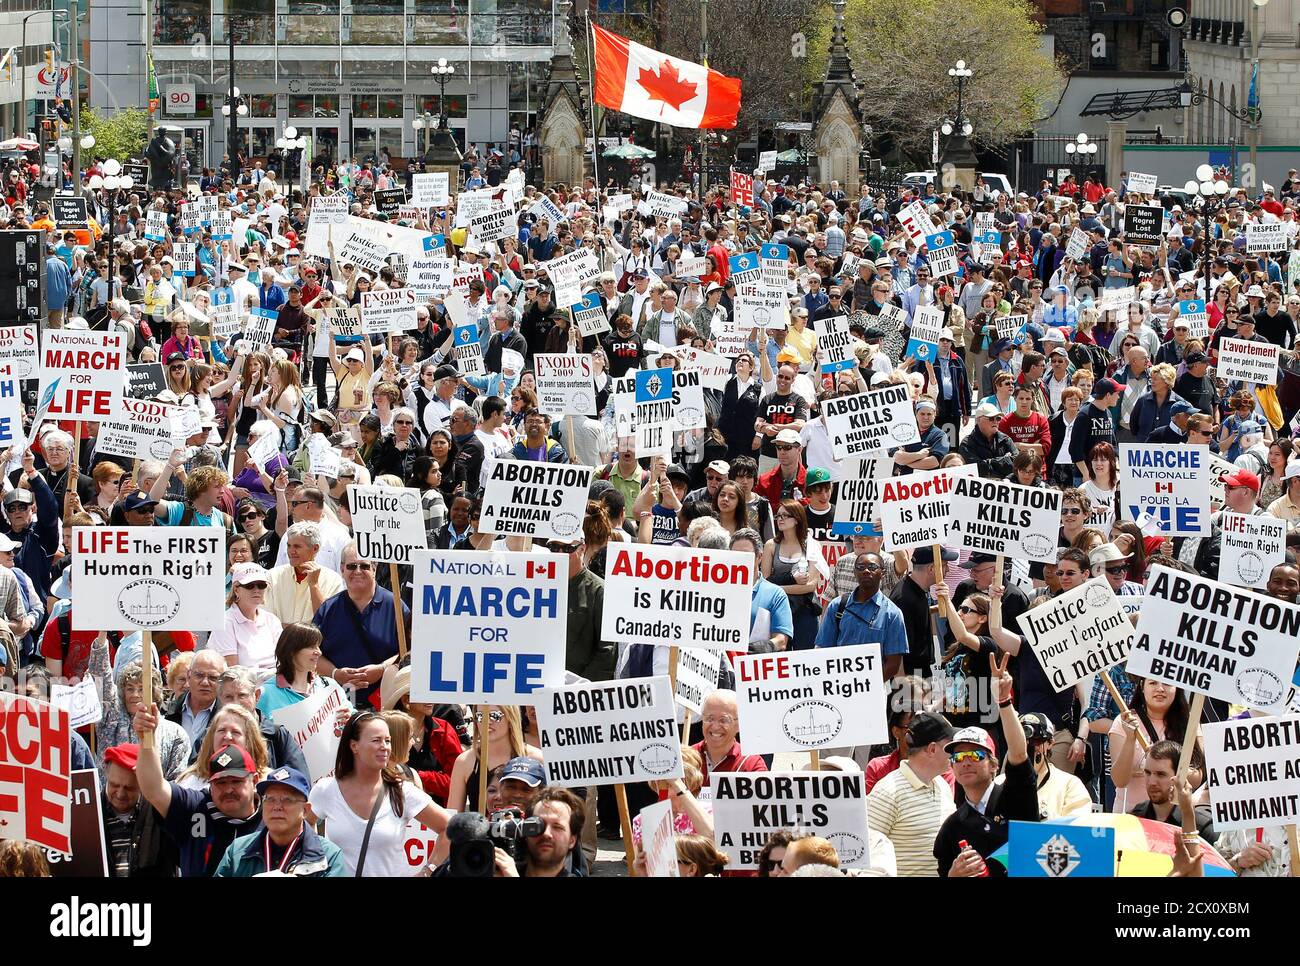 Anti-abortion protesters take part in the National March for Life demonstration on Parliament Hill in Ottawa May 12, 2011.  REUTERS/Chris Wattie       (CANADA - Tags: POLITICS) Stock Photo